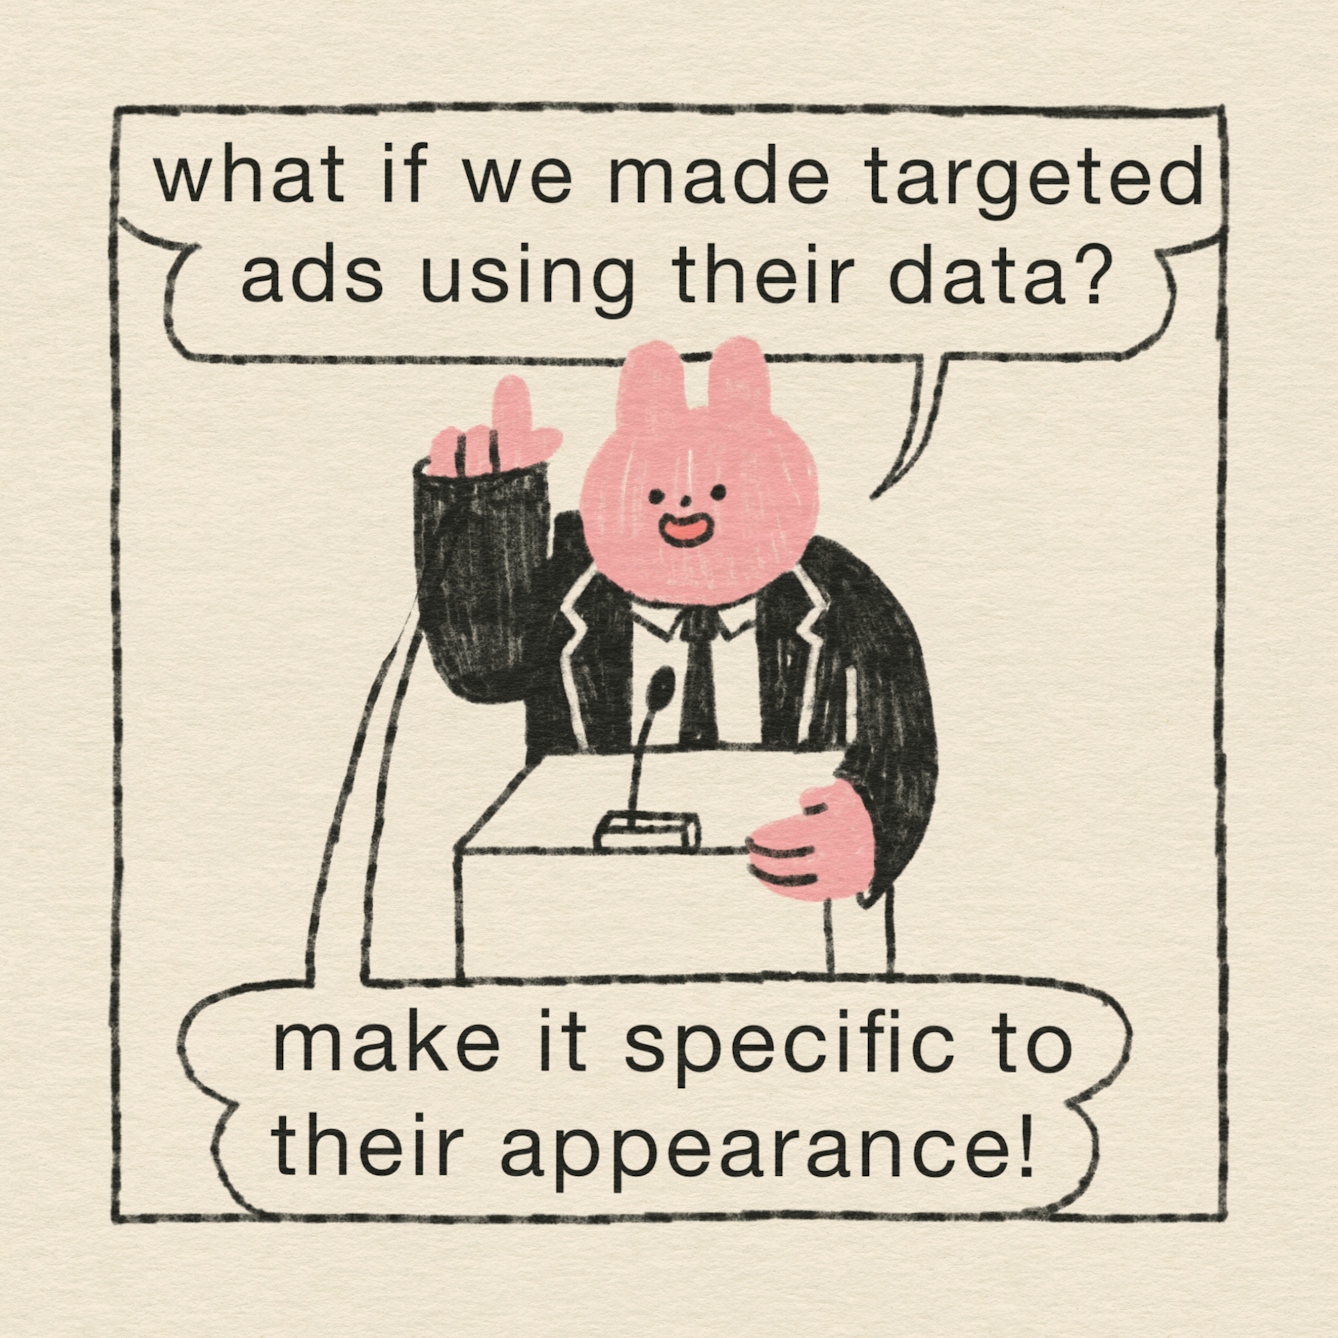 Panel 2 of 4: A pink rabbit in a black suit and tie stands on a podium to present an idea. “What if we made targeted ads using their data? Make it specific to their appearance!”, he suggests.